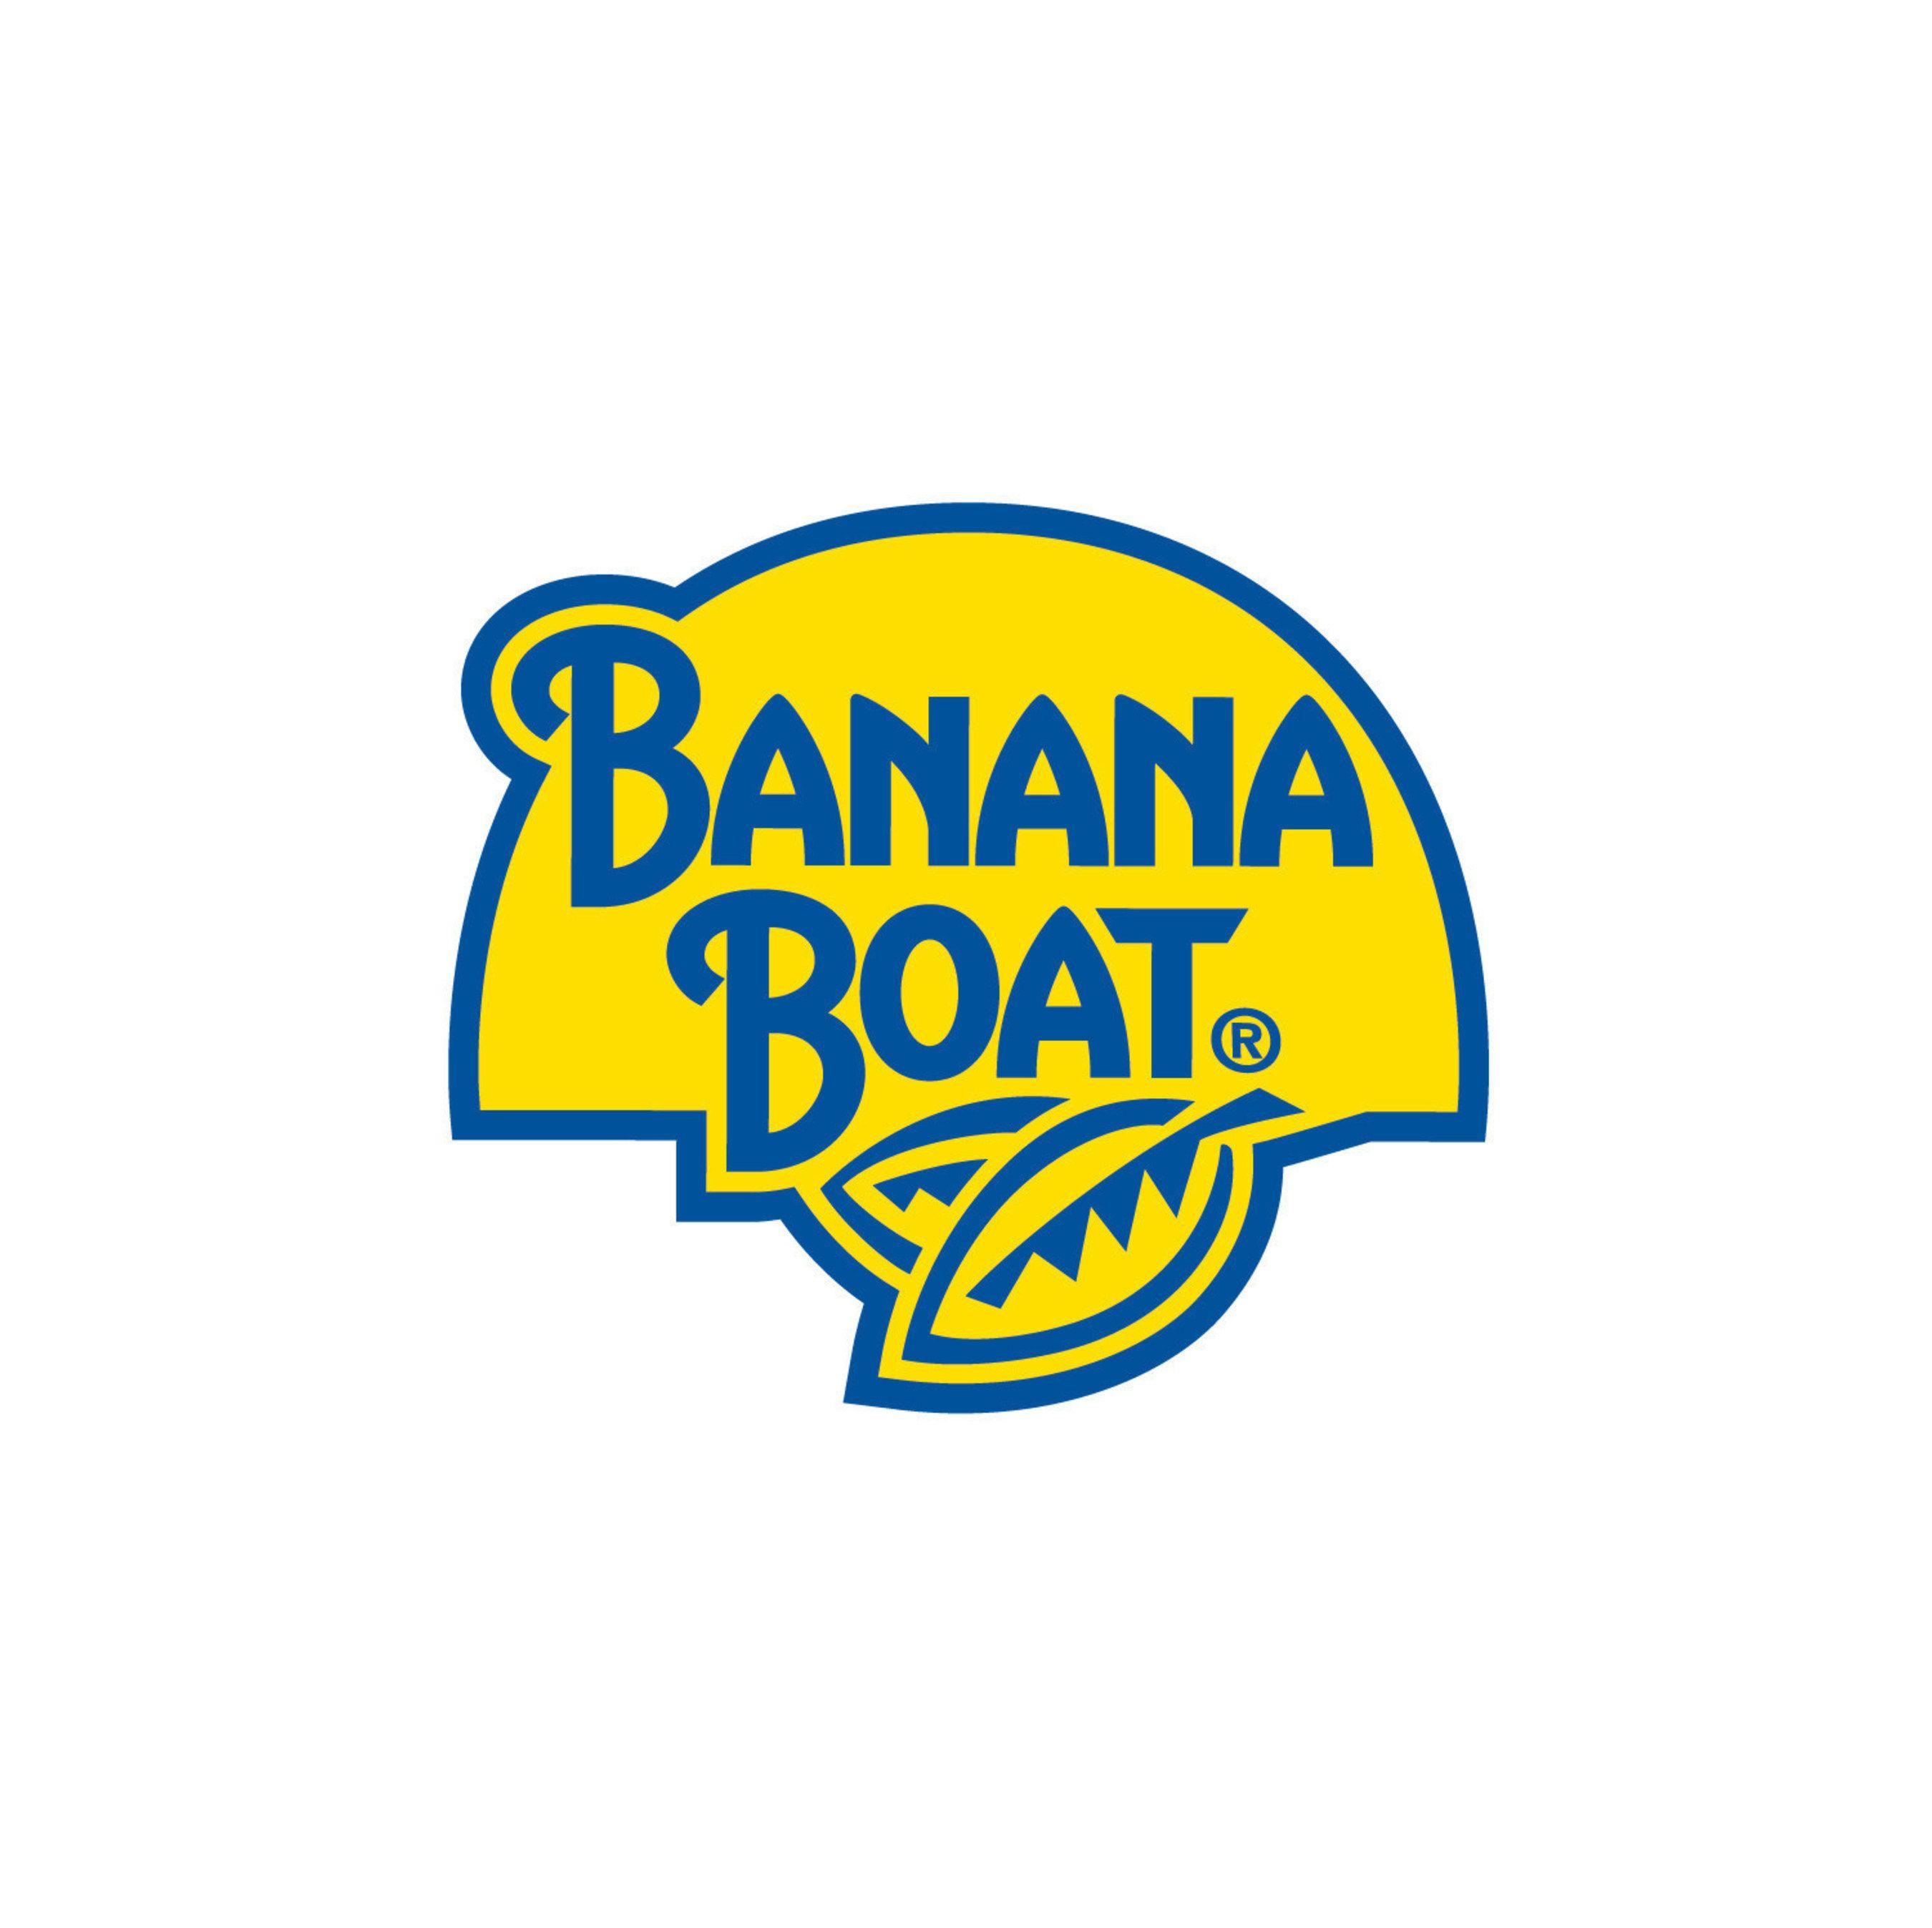 Sunscreen Logo - Banana Boat® Sun Care Launches New Sunscreen Offerings with Unique